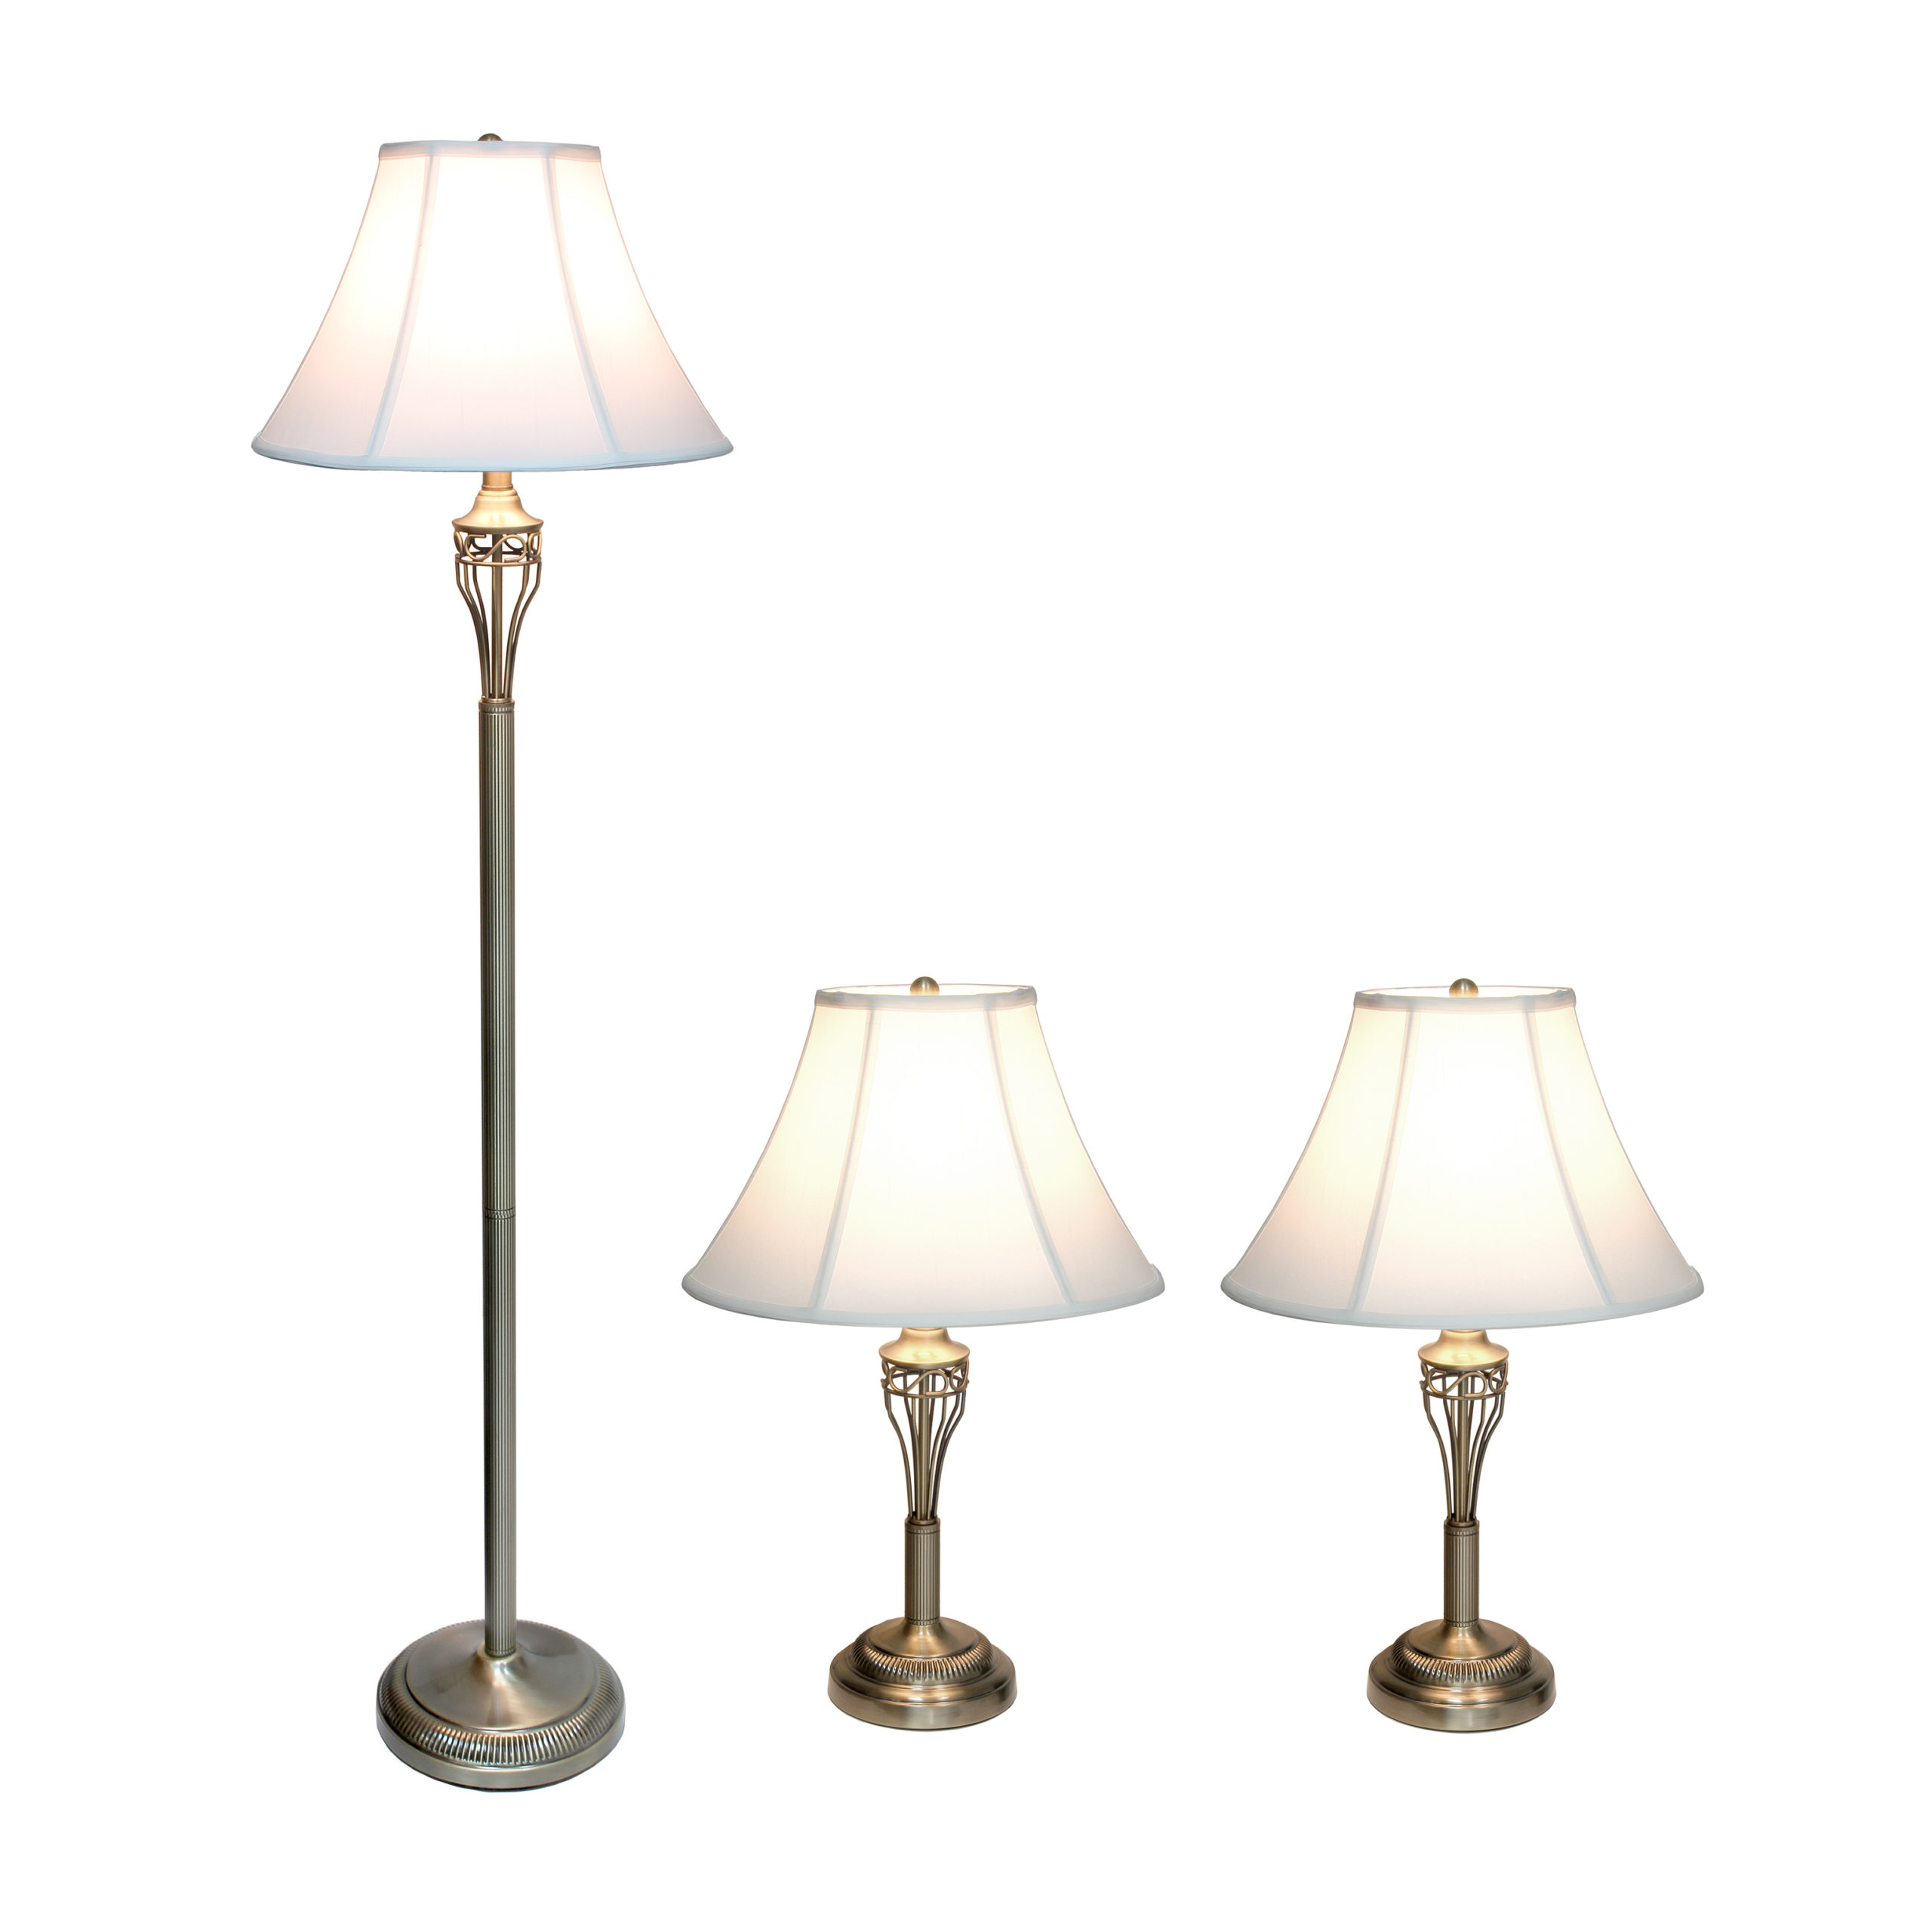 Elegant Designs Antique Brass Three Pack Lamp Set 2 Table Lamps 1 Floor Lamp All The Rages